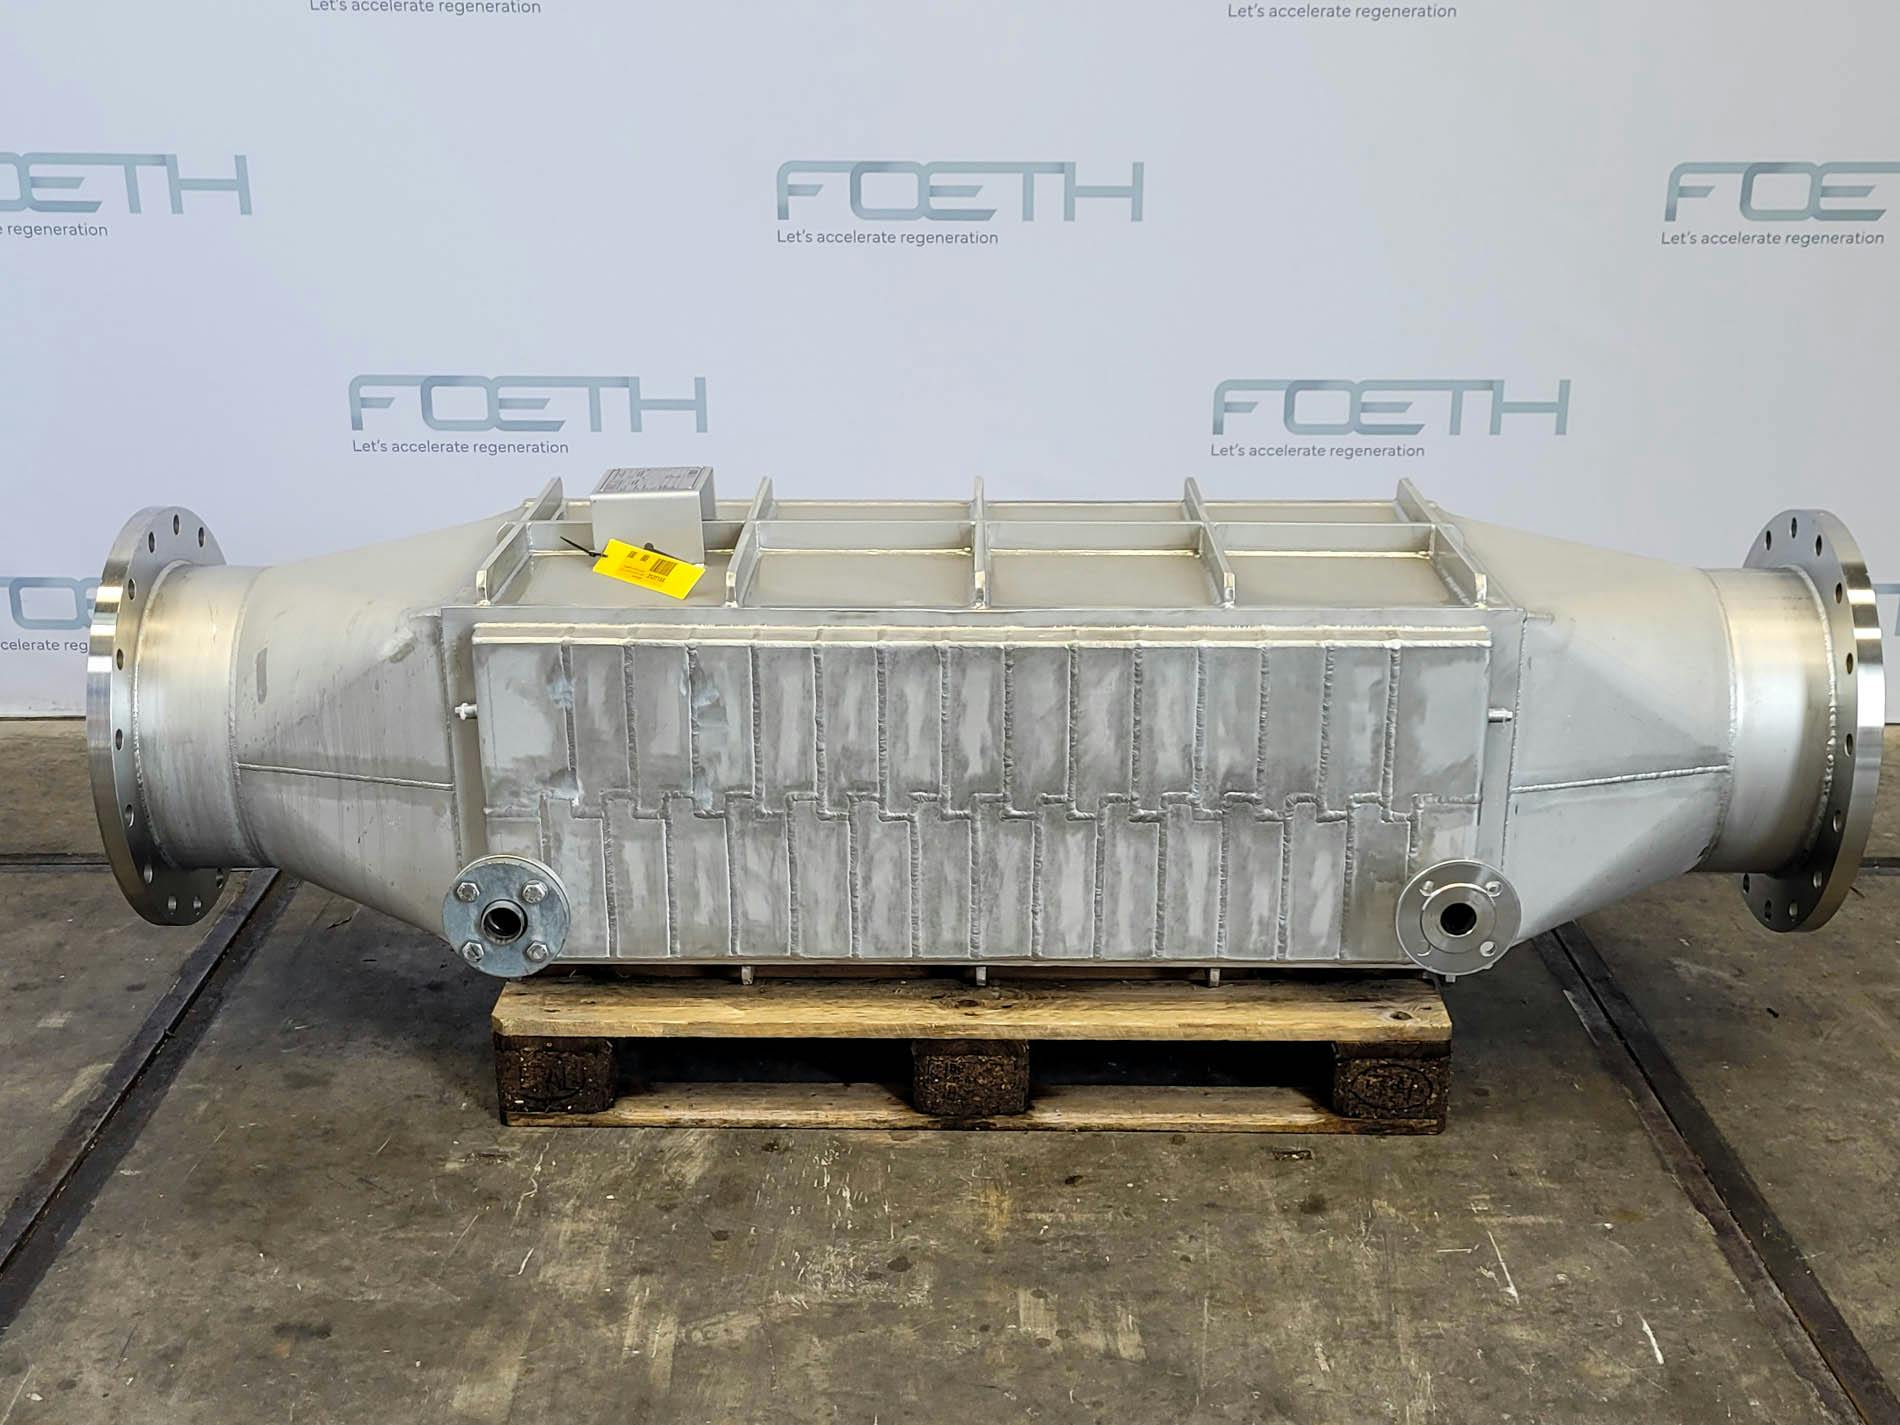 Enco "Finned / Rippenrohr" - Shell and tube heat exchanger